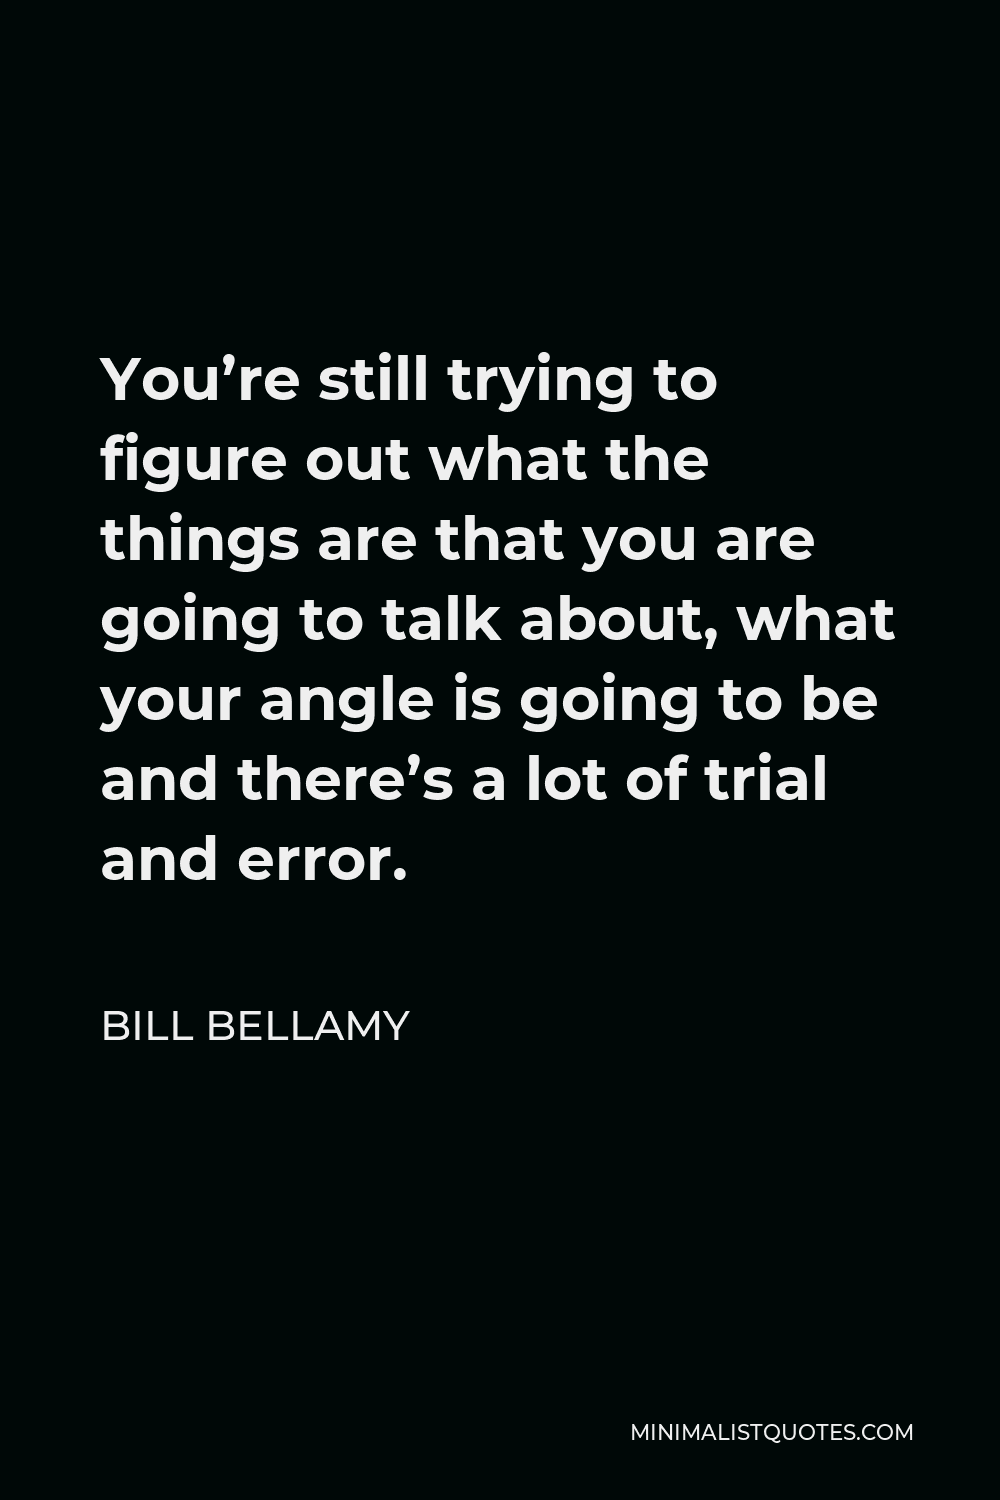 Bill Bellamy Quote - You’re still trying to figure out what the things are that you are going to talk about, what your angle is going to be and there’s a lot of trial and error.